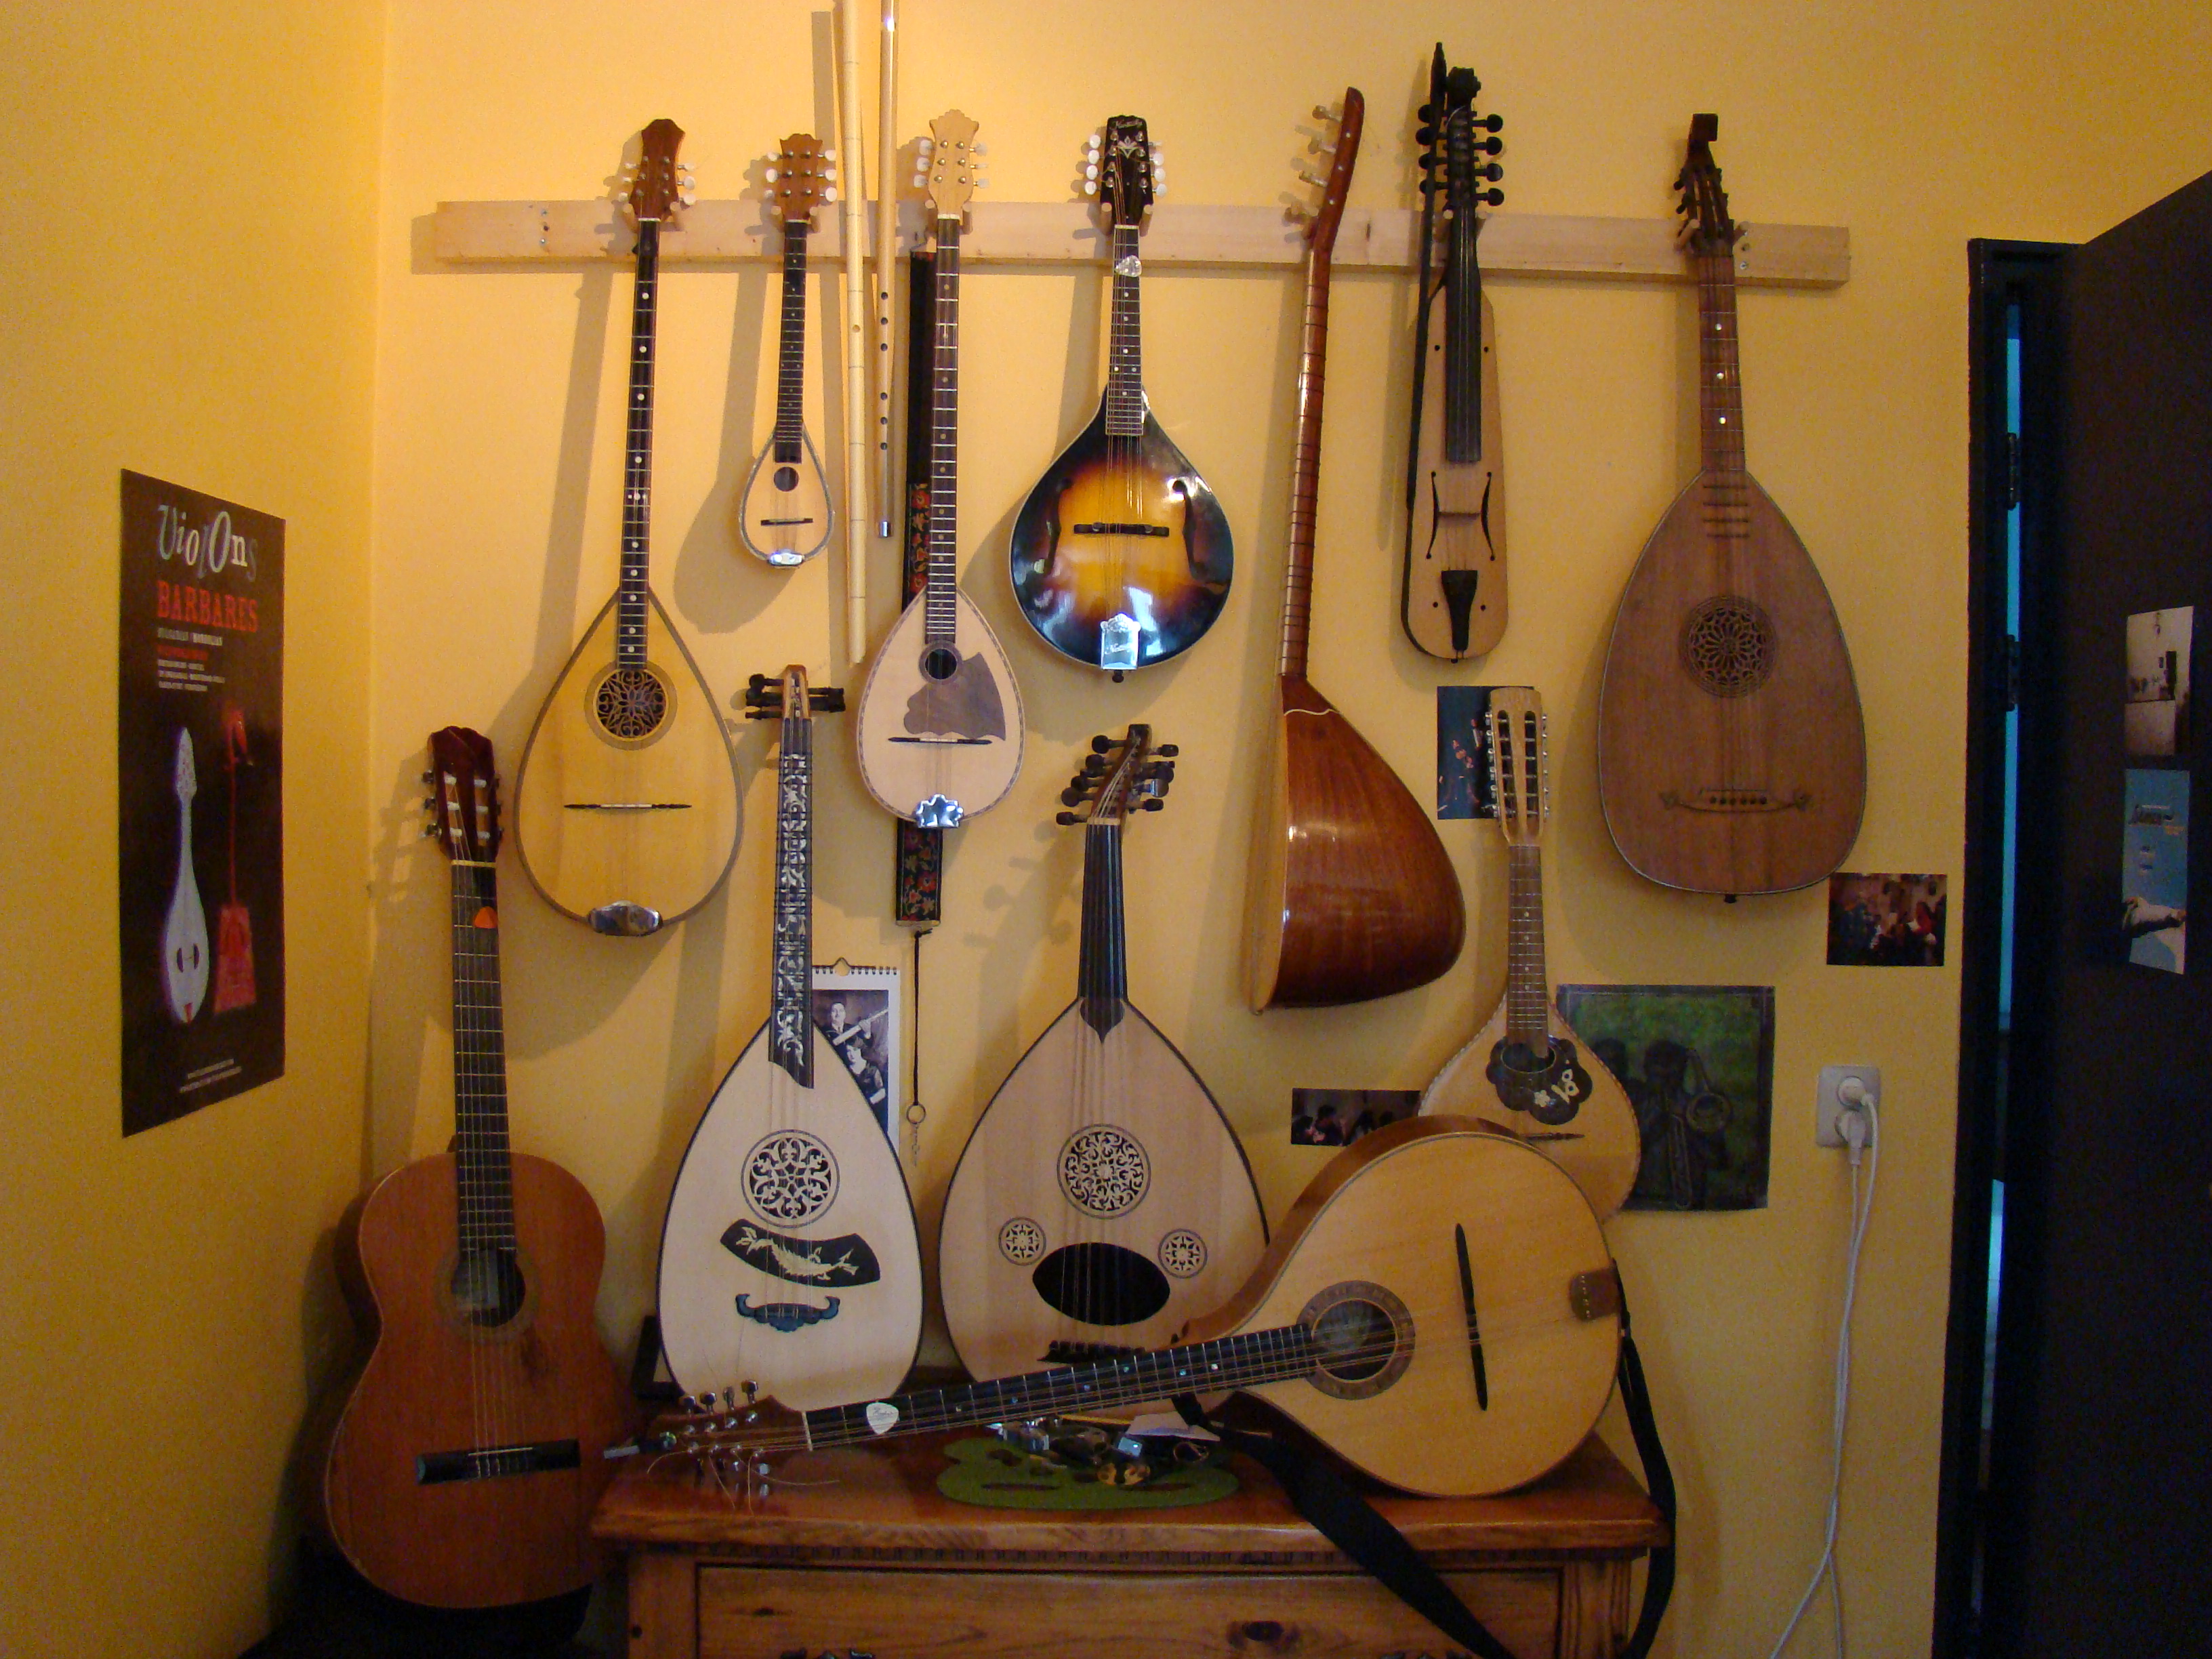 All our instruments